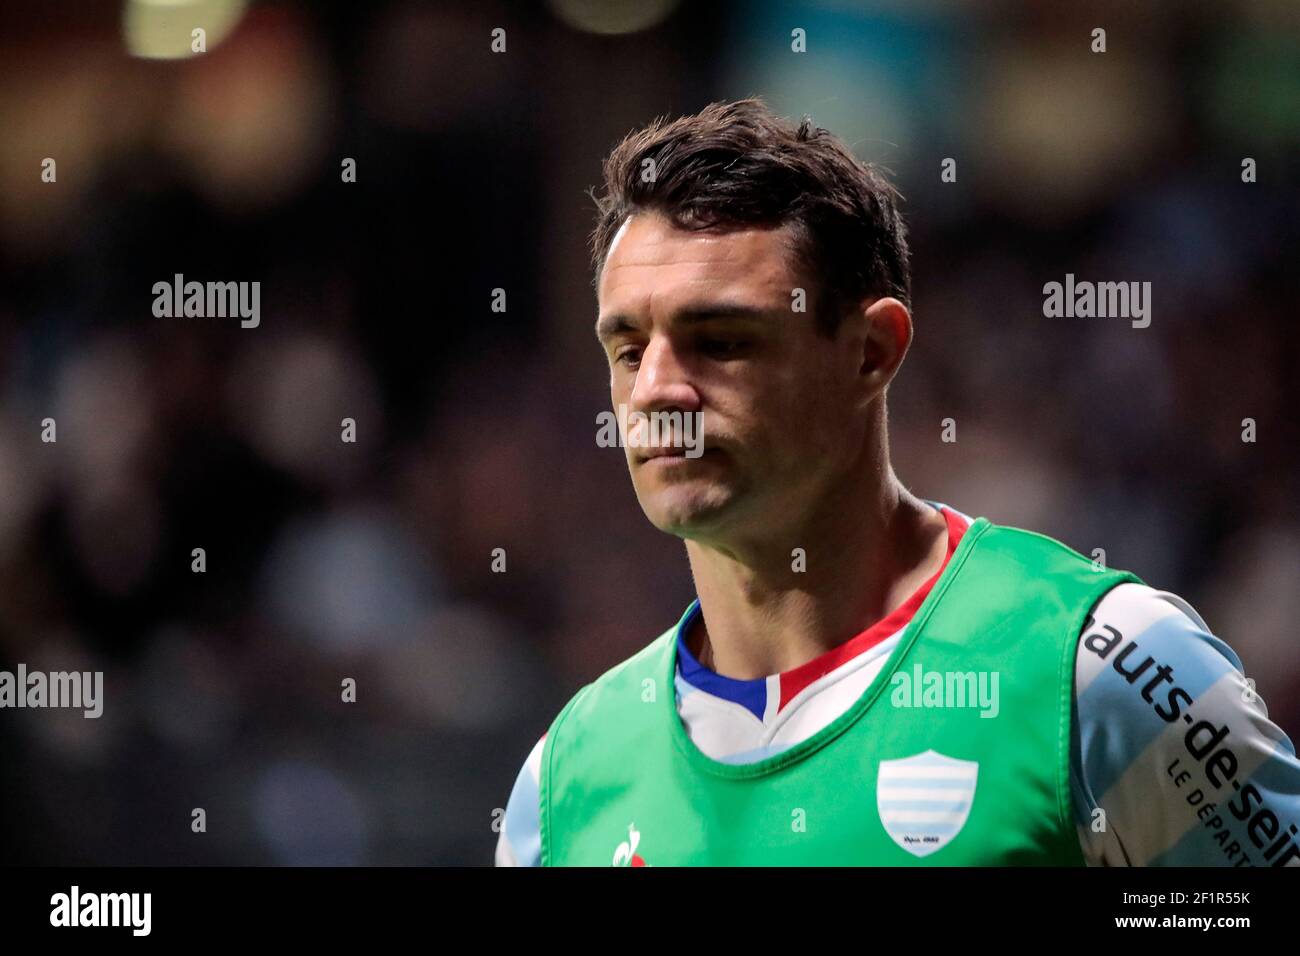 Daniel William Carter - Dan Carter (Racing 92) at warm up during the French Championship Top 14 Rugby Union match between Racing 92 and RC Toulon on April 8, 2018 at U Arena in Nanterre, France - Photo Stephane Allaman / DPPI Stock Photo